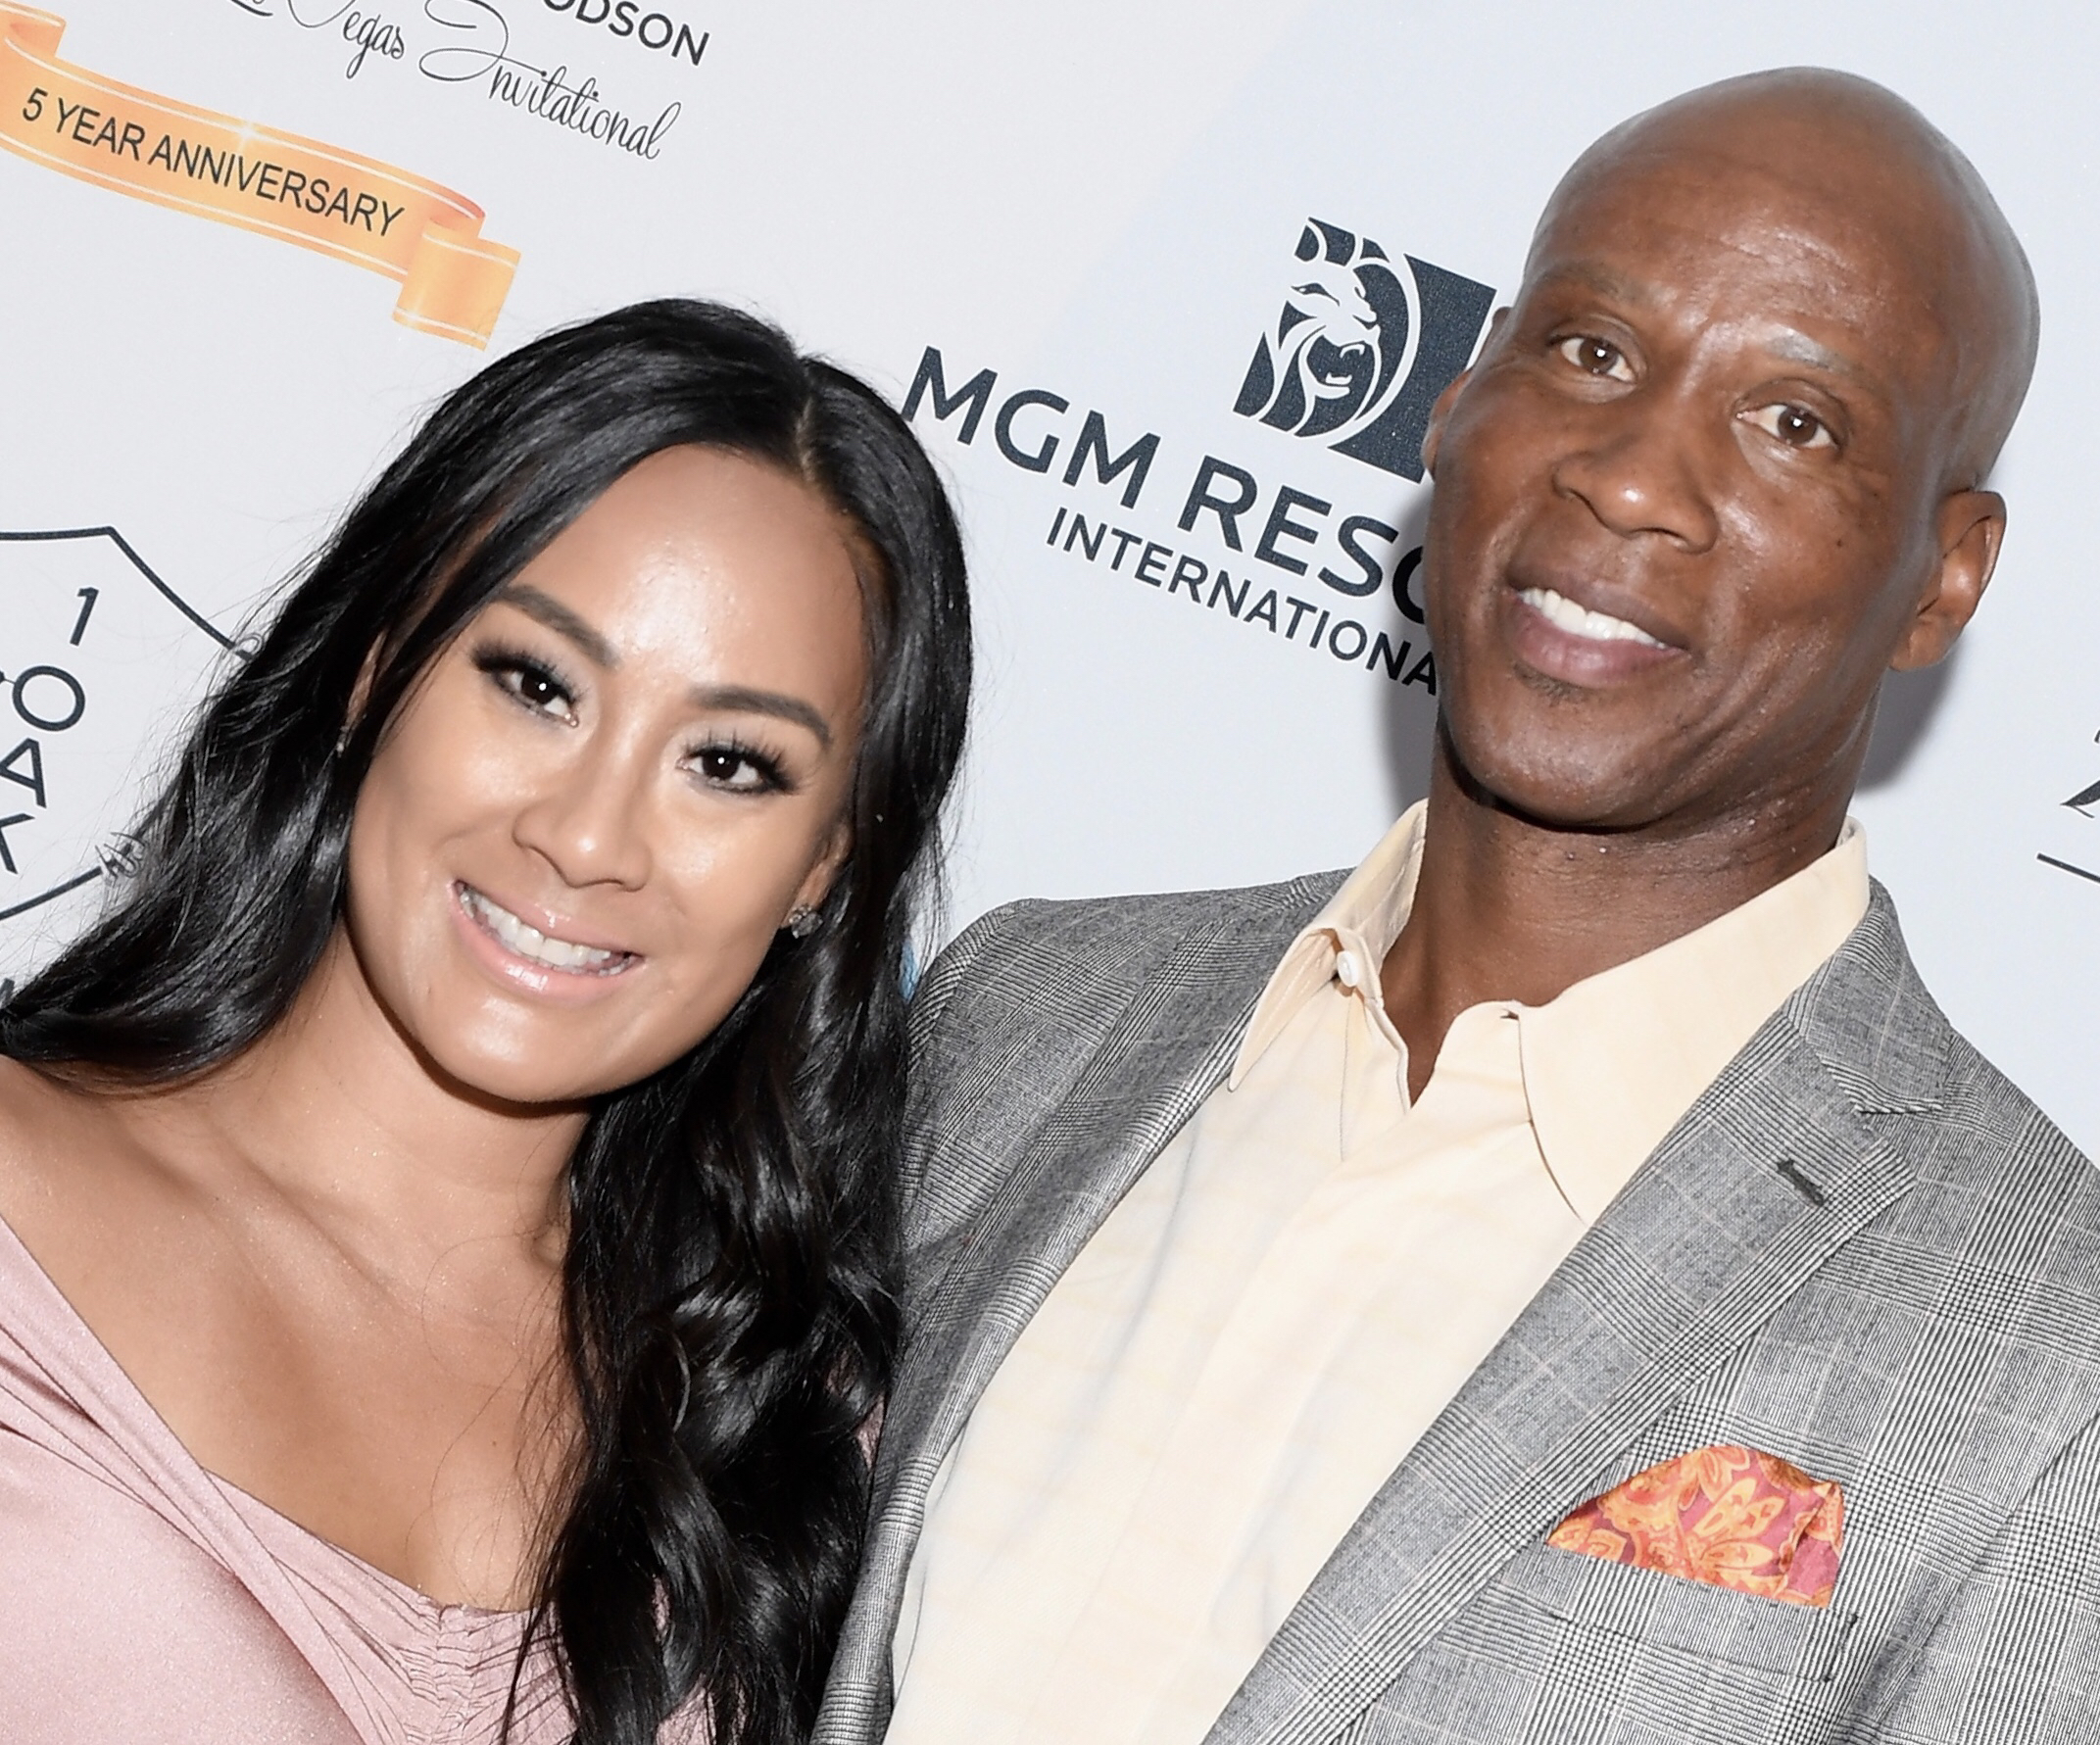 Cece Gutierrez (L) and former NBA player and coach Byron Scott get engaged.